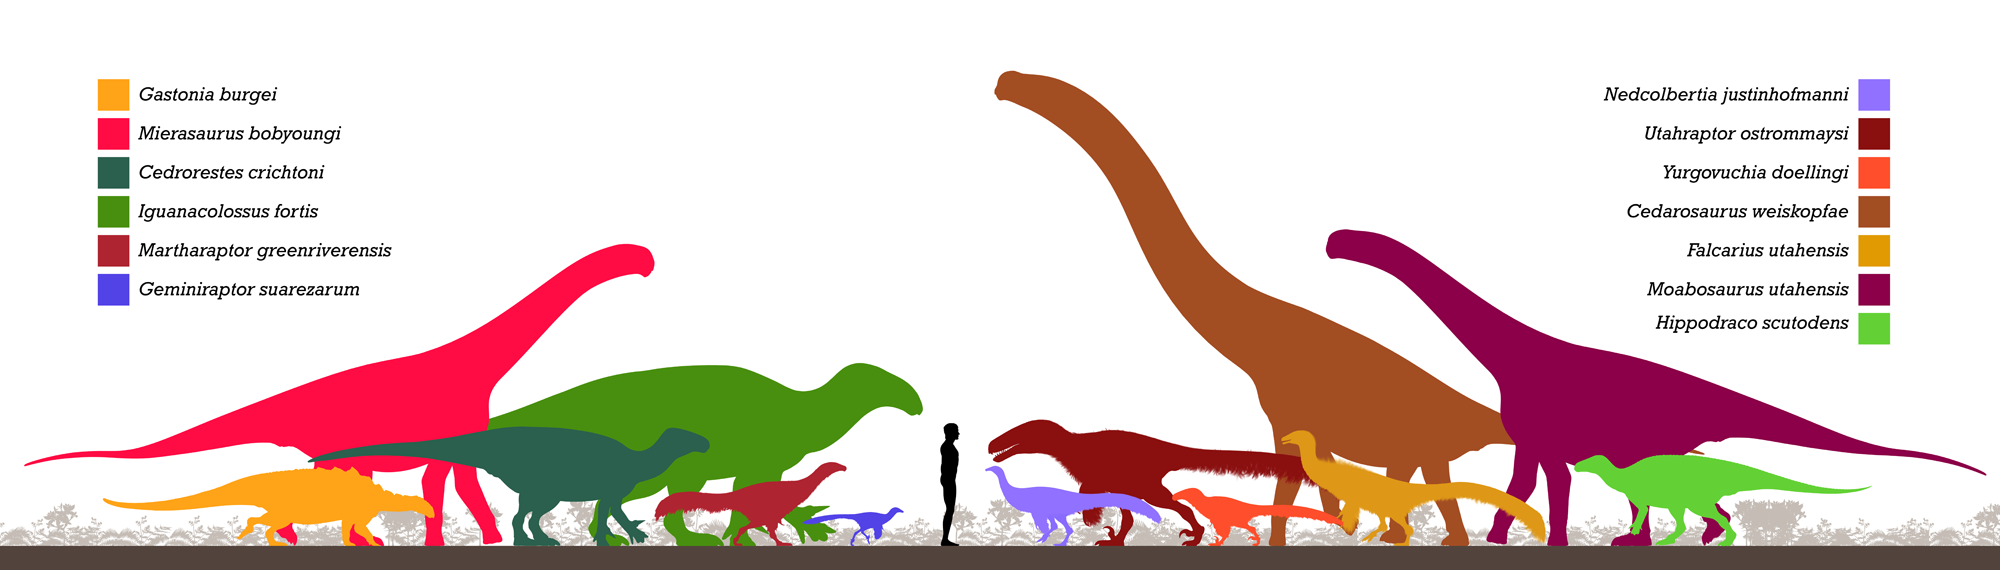 Diagram showing color-coded silhouettes of dinosaurs from the Early Cretaceous Yellow Cat Member of the Cedar Mountain Formation scaled to size. Dinosaurs shown: Cedarosaurus weiskopfae, Length = 15 meters. Cedrorestes crichtoni, Length = 6 meters. Falcarius utahensis, Length = 5 meters. Gastonia burgei, Length = 5 meters. Geminiraptor suarezarum, Length = 1.5 meters. Hippodraco scutodens, Length = 4.5 meters. Iguanacolossus fortis, Length = 9 meters. Martharaptor greenriverensis. Mierasaurus bobyoungi, Length = ∼9 meters. Moabosaurus utahensis, Length = 9.75 meters. Nedcolbertia justinhofmanni, Length = ∼3 meters. Utahraptor ostrommaysi, Length = 5.5 meters. Yurgovuchia doellingi, Length = 2.5 meters.